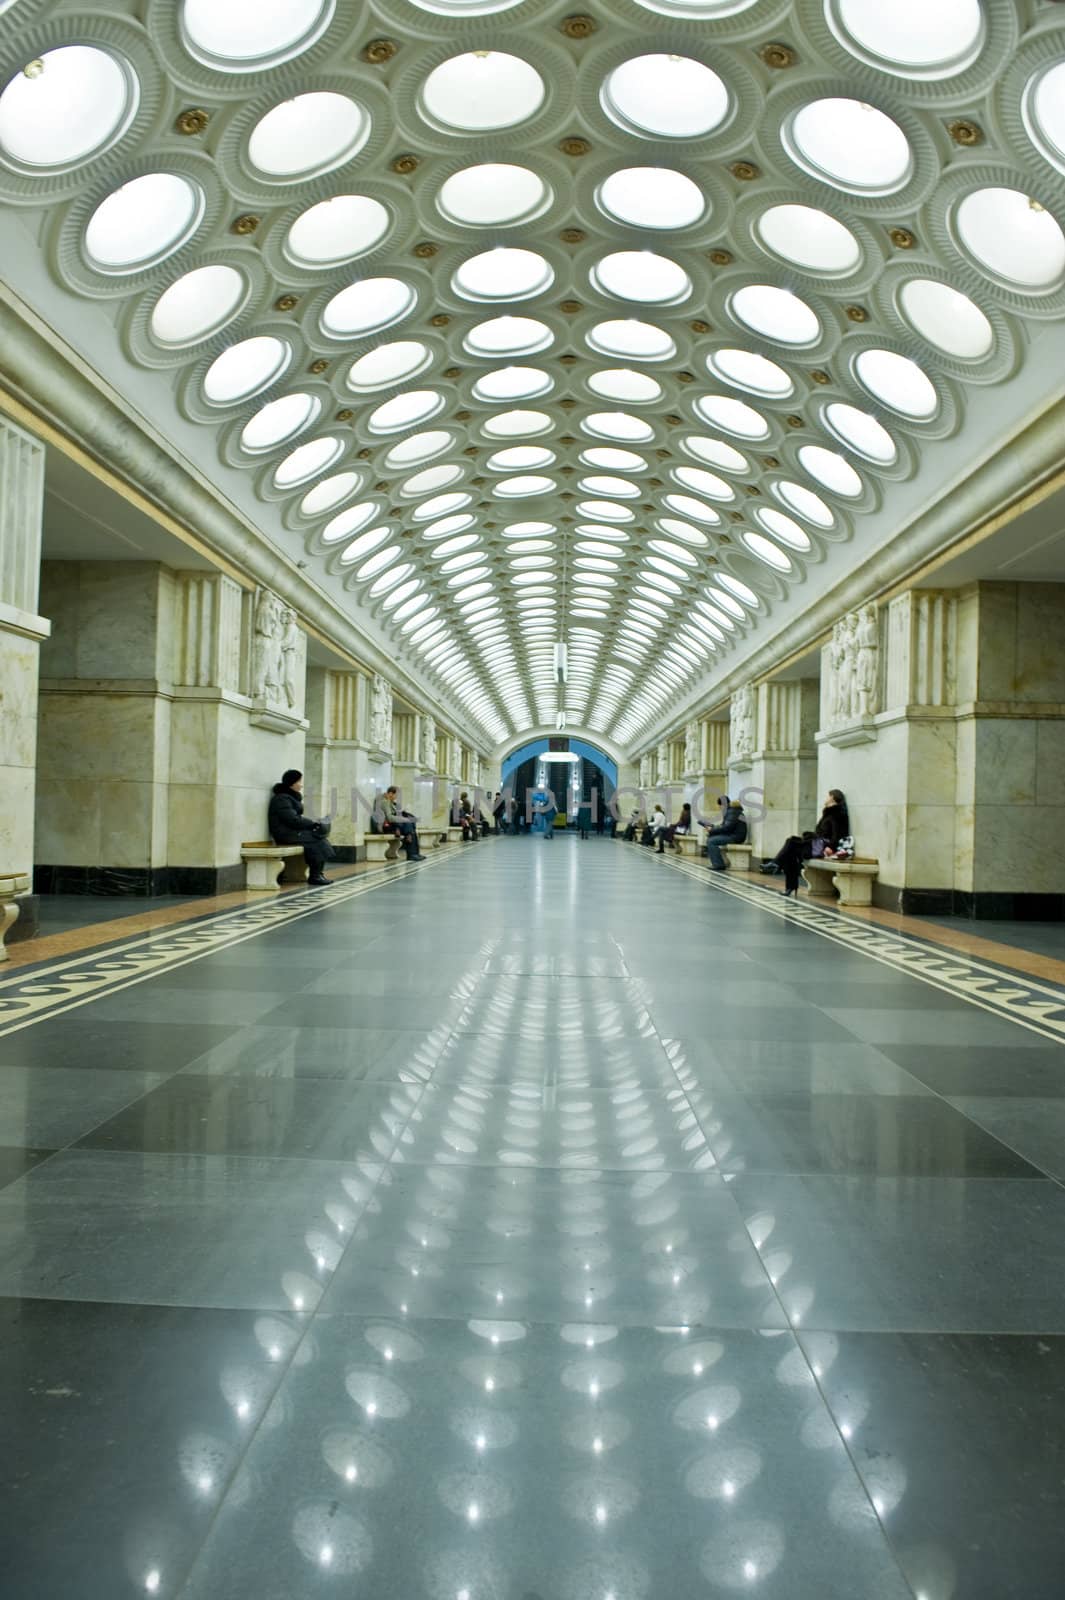 Moscow metro by Alenmax